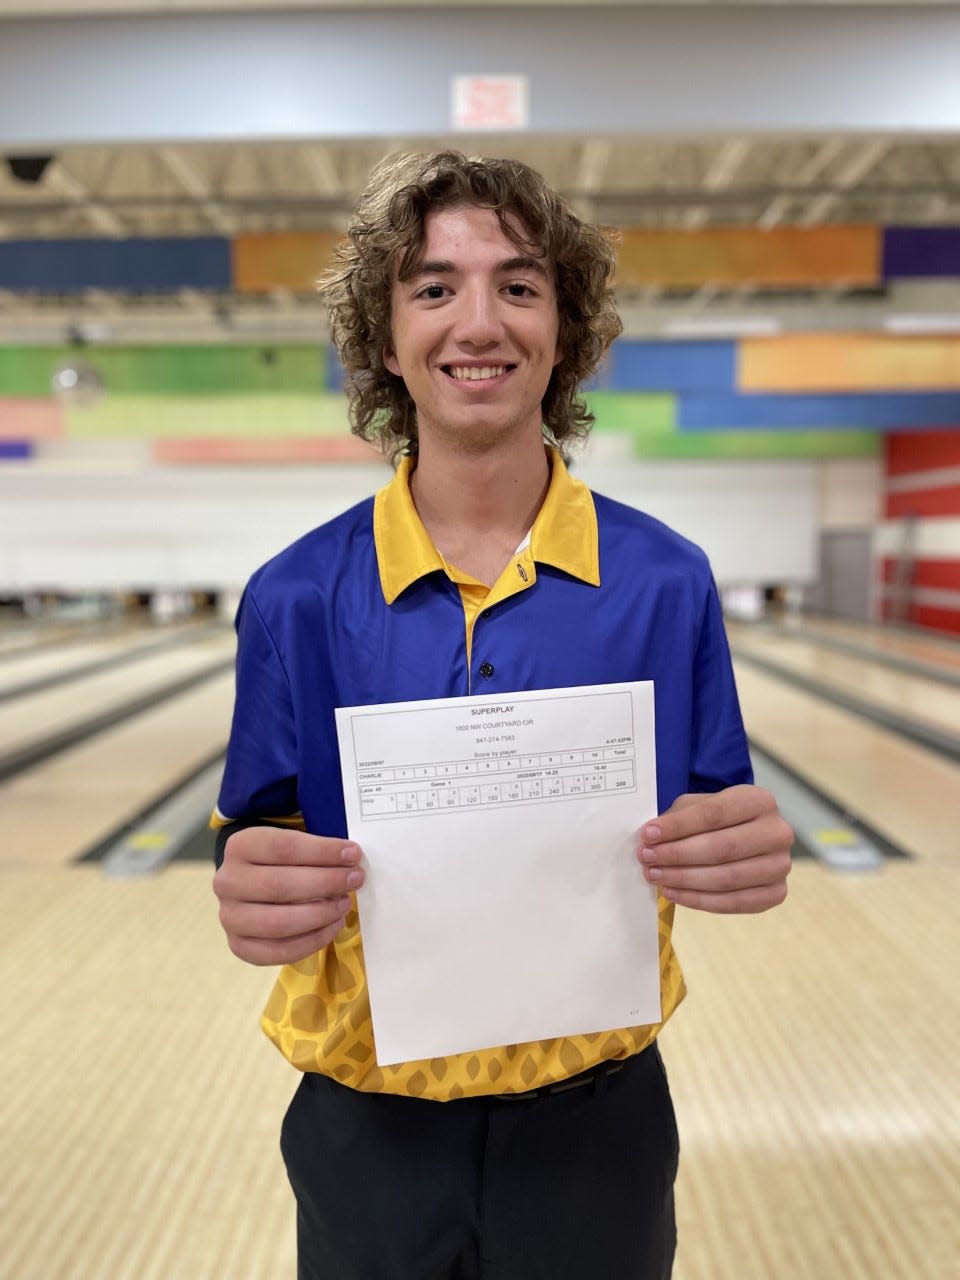 Fort Pierce Central senior bowler Charlie Passanante bowled a 300 game in a match against Somerset College Prep on Wednesday, Sept. 7, 2022 at Superplay USA in Port St. Lucie. It is the second time in his life Passanante has bowled a perfect game, achieving the feat in a practice for the Cobras last year.